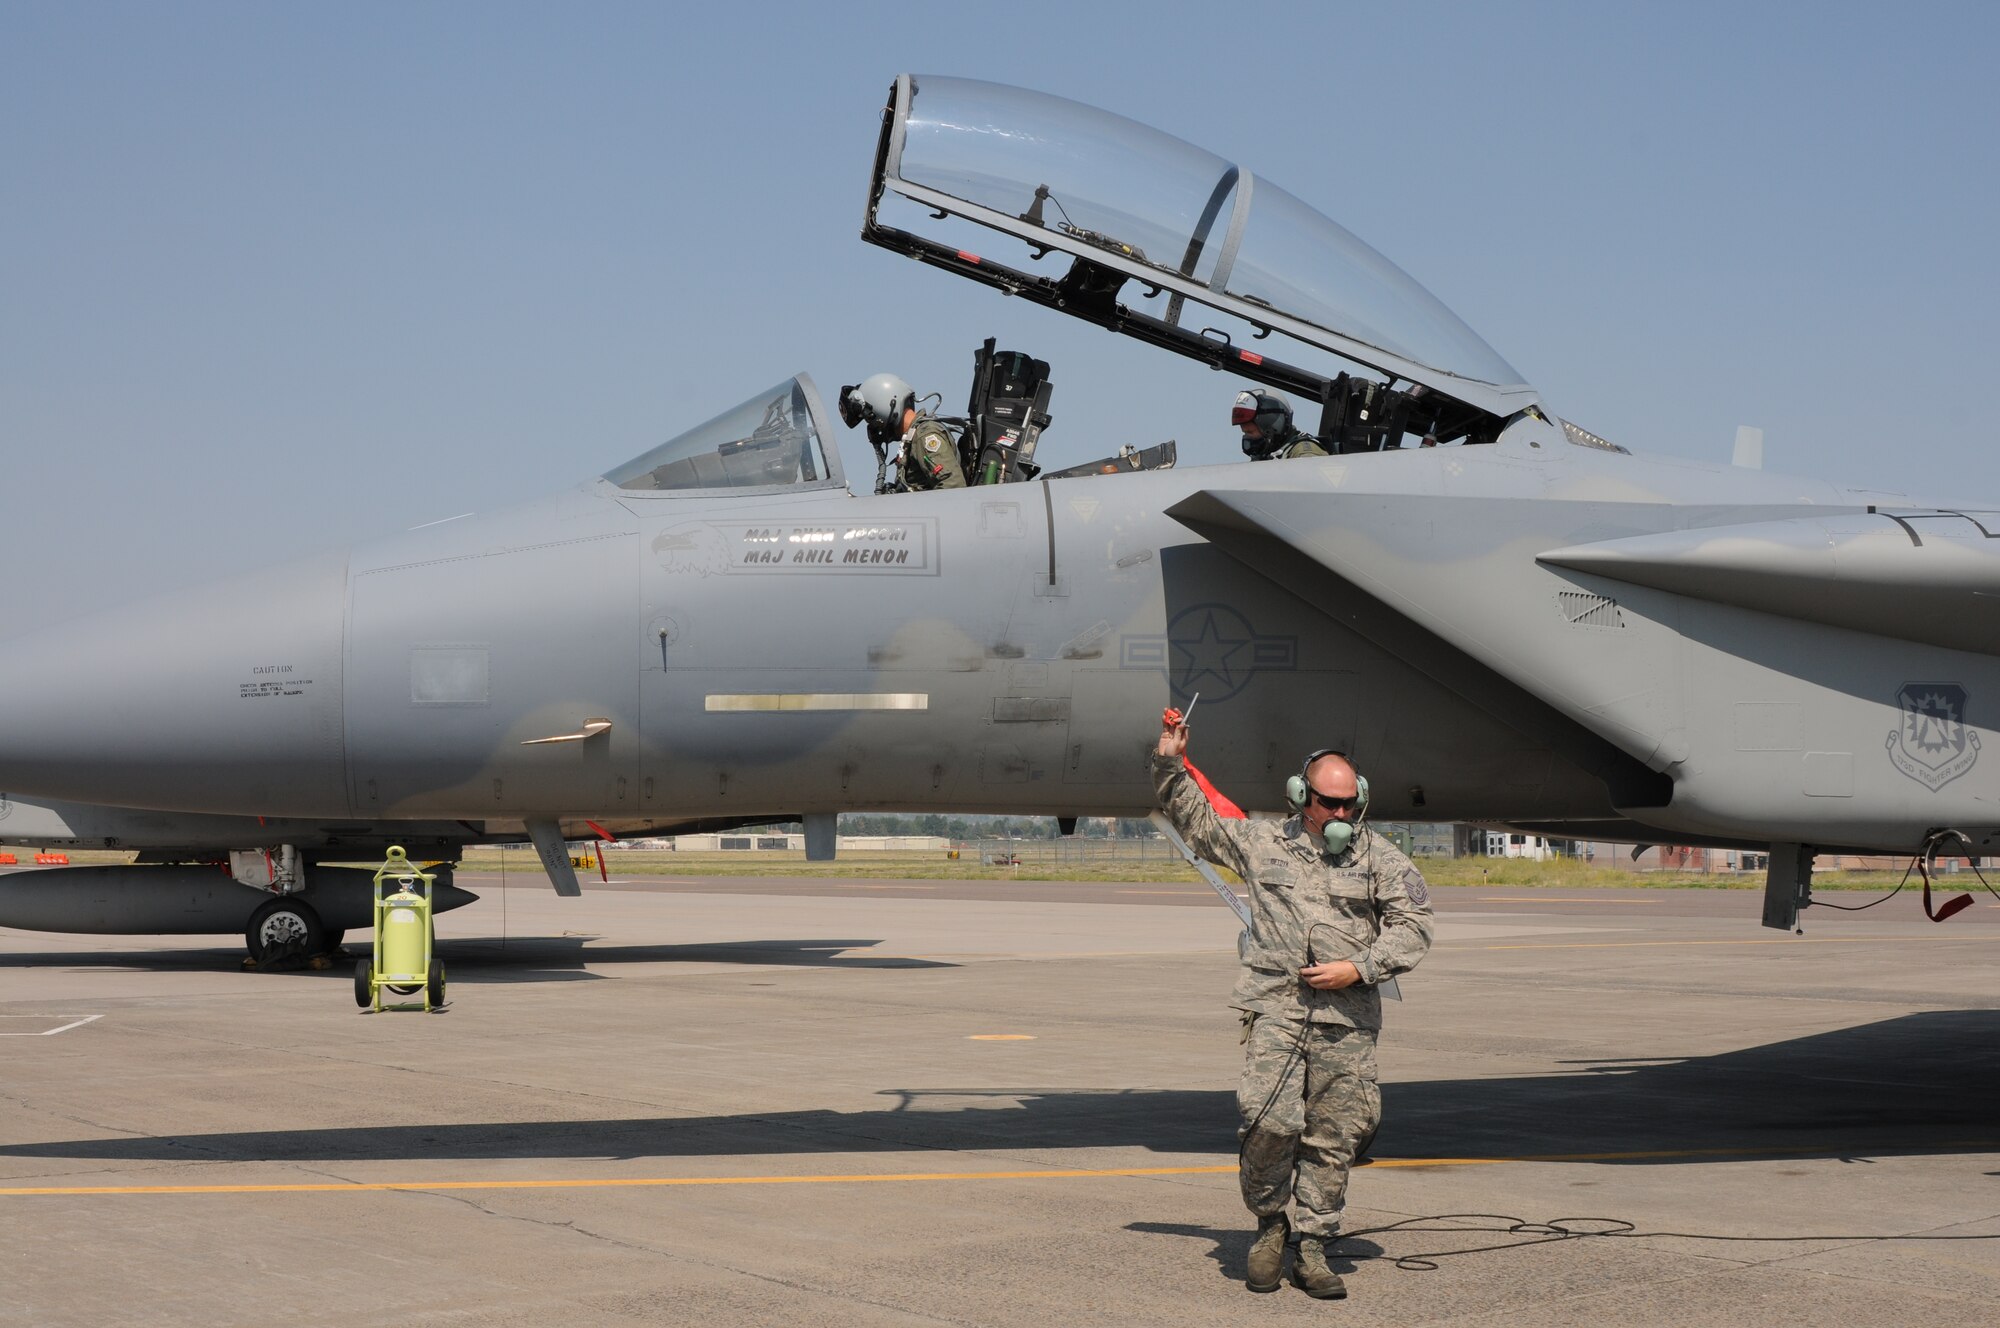 Master Sgt. Casey Rietdyk, 173rd Fighter Wing F-15 crew chief, signals to Col. Wes French (front seat), 173rd Operations Group commander, and Gen. Robin Rand, commander of Air Education and Training Command, that he pulled a pin in preparation for their flight at Kingsley Field, Klamath Falls, Ore., Aug. 27. As the sole U.S. Air Force F-15C training base, the 173 FW is aligned under AETC. (U.S. Air National Guard photo by Master Sgt. Jennifer Shirar)  